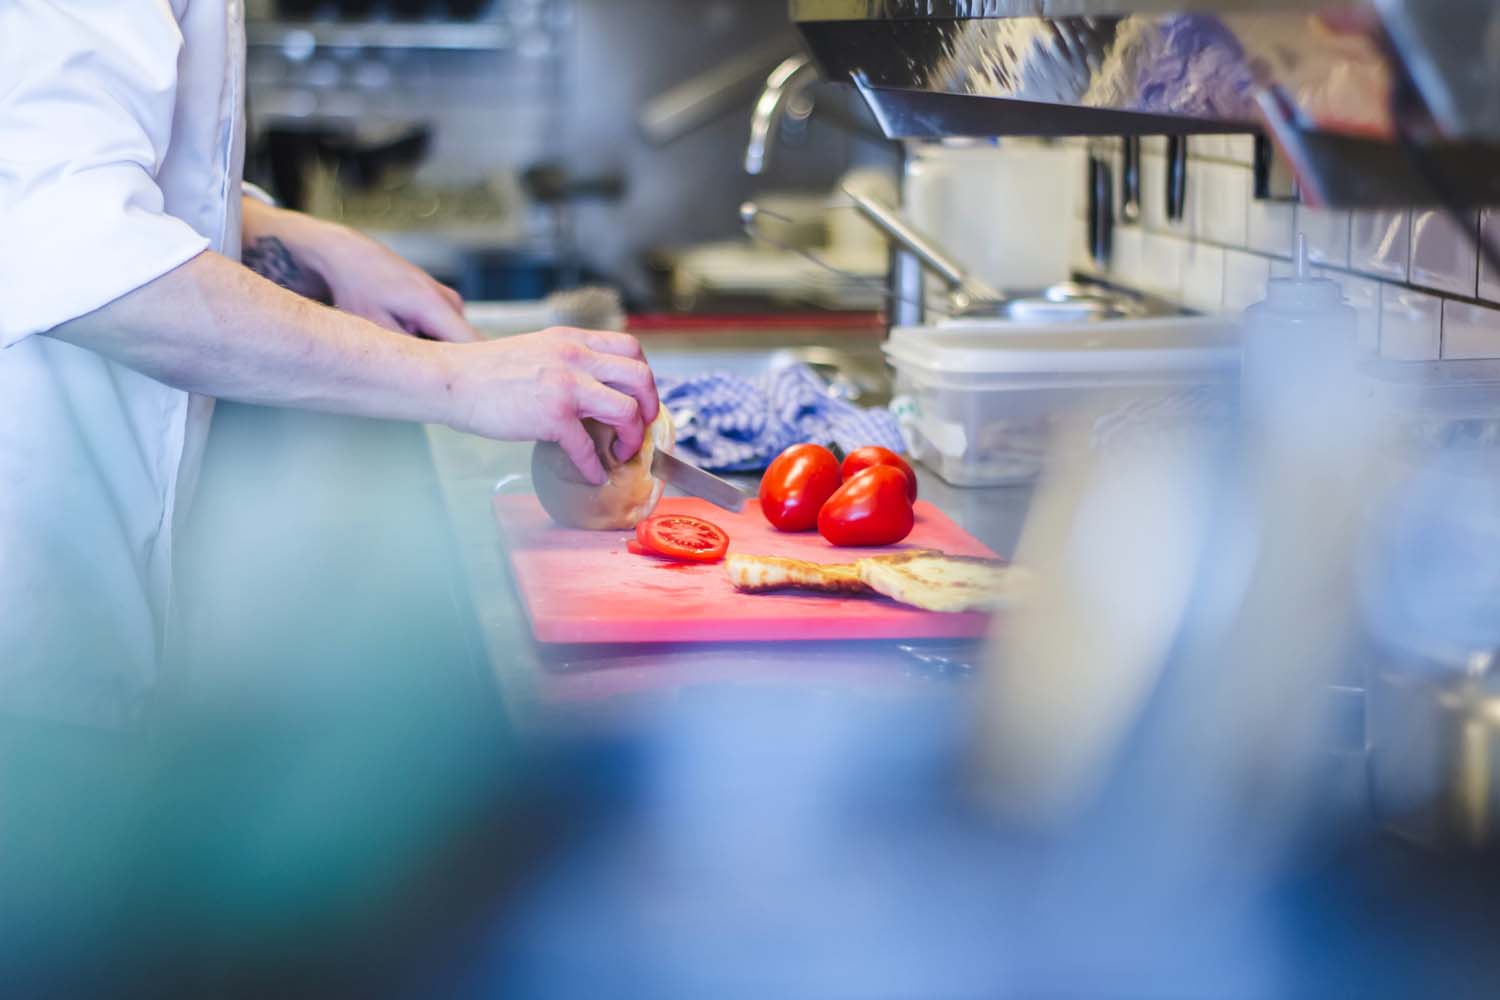 A close up on a pair of hands slicing tomatoes and bread on a cutting board. There is professional kitchen equipment on the background.